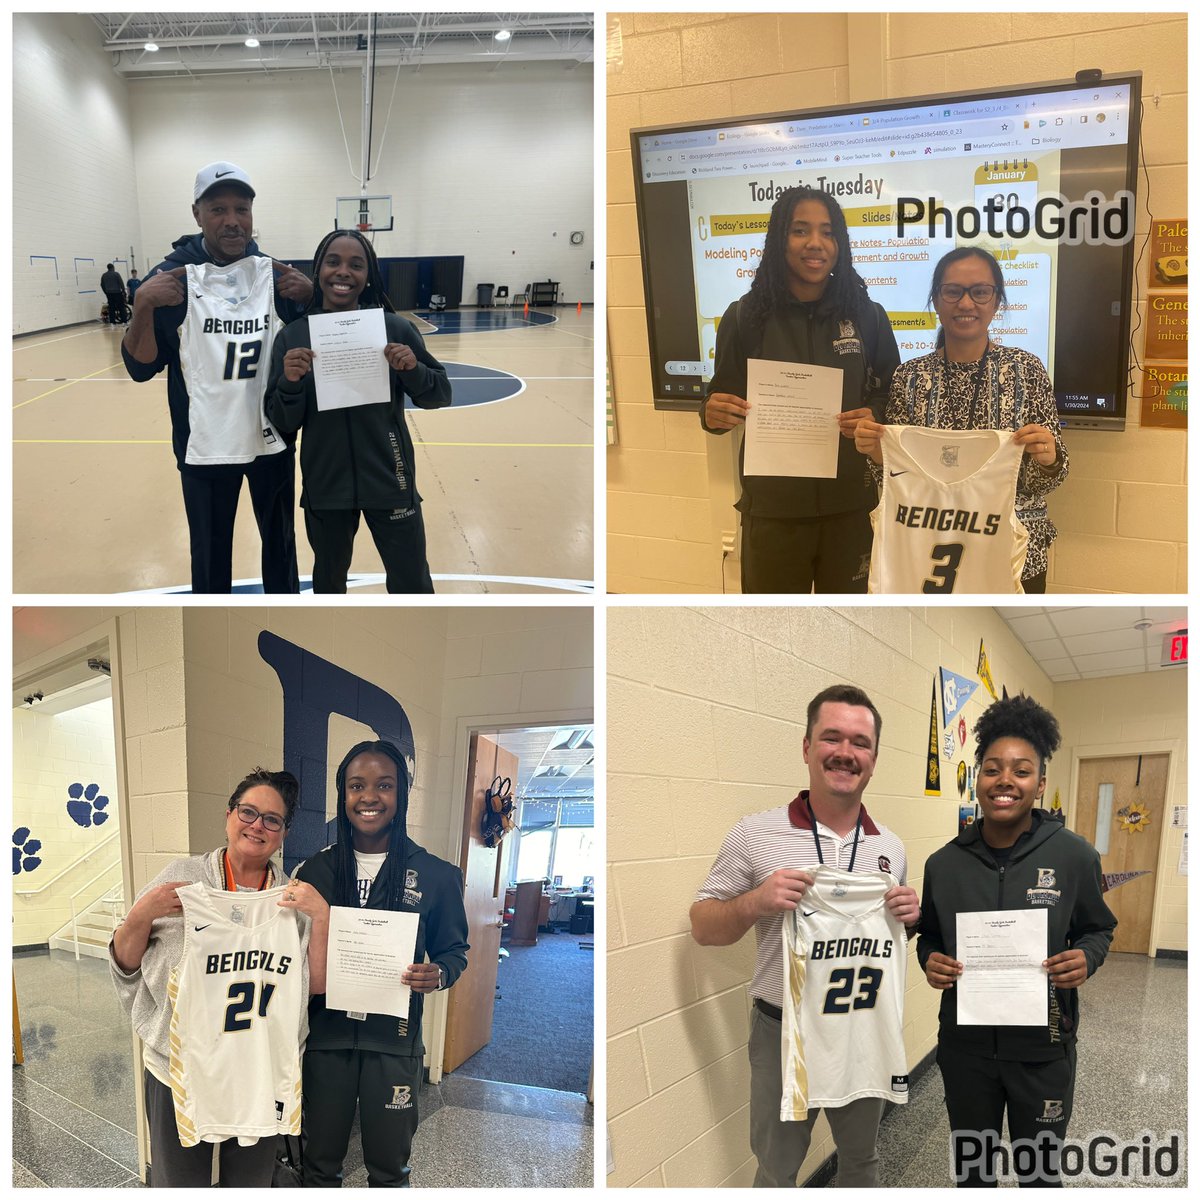 In honor of our Teacher Appreciation Game some of the Blythewood Girls Basketball players presented their favorite teachers with thier jerseys for the day. Your dedication and willingness to go above and beyond have made a significant impact on our work. We are truly thankful.